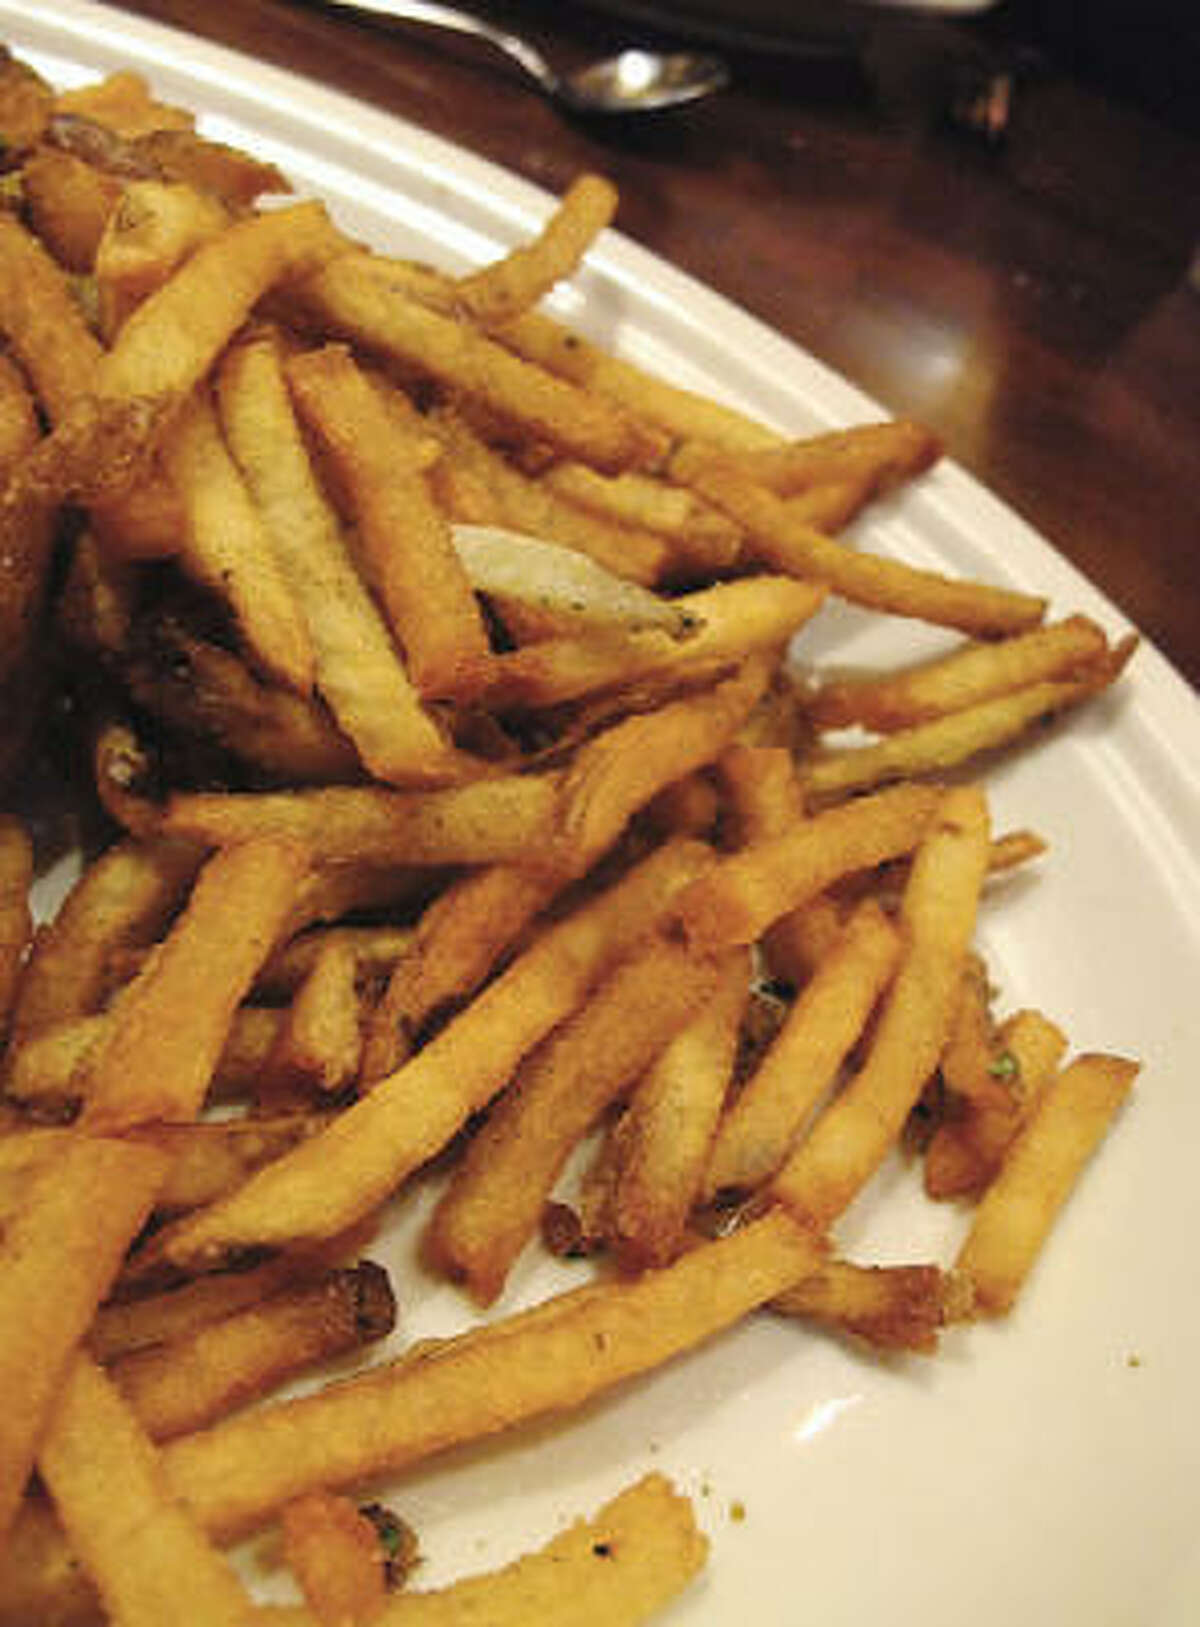 The wonderful hand-cut French fries at Laurenzo's prime rib joint on Washington Avenue.